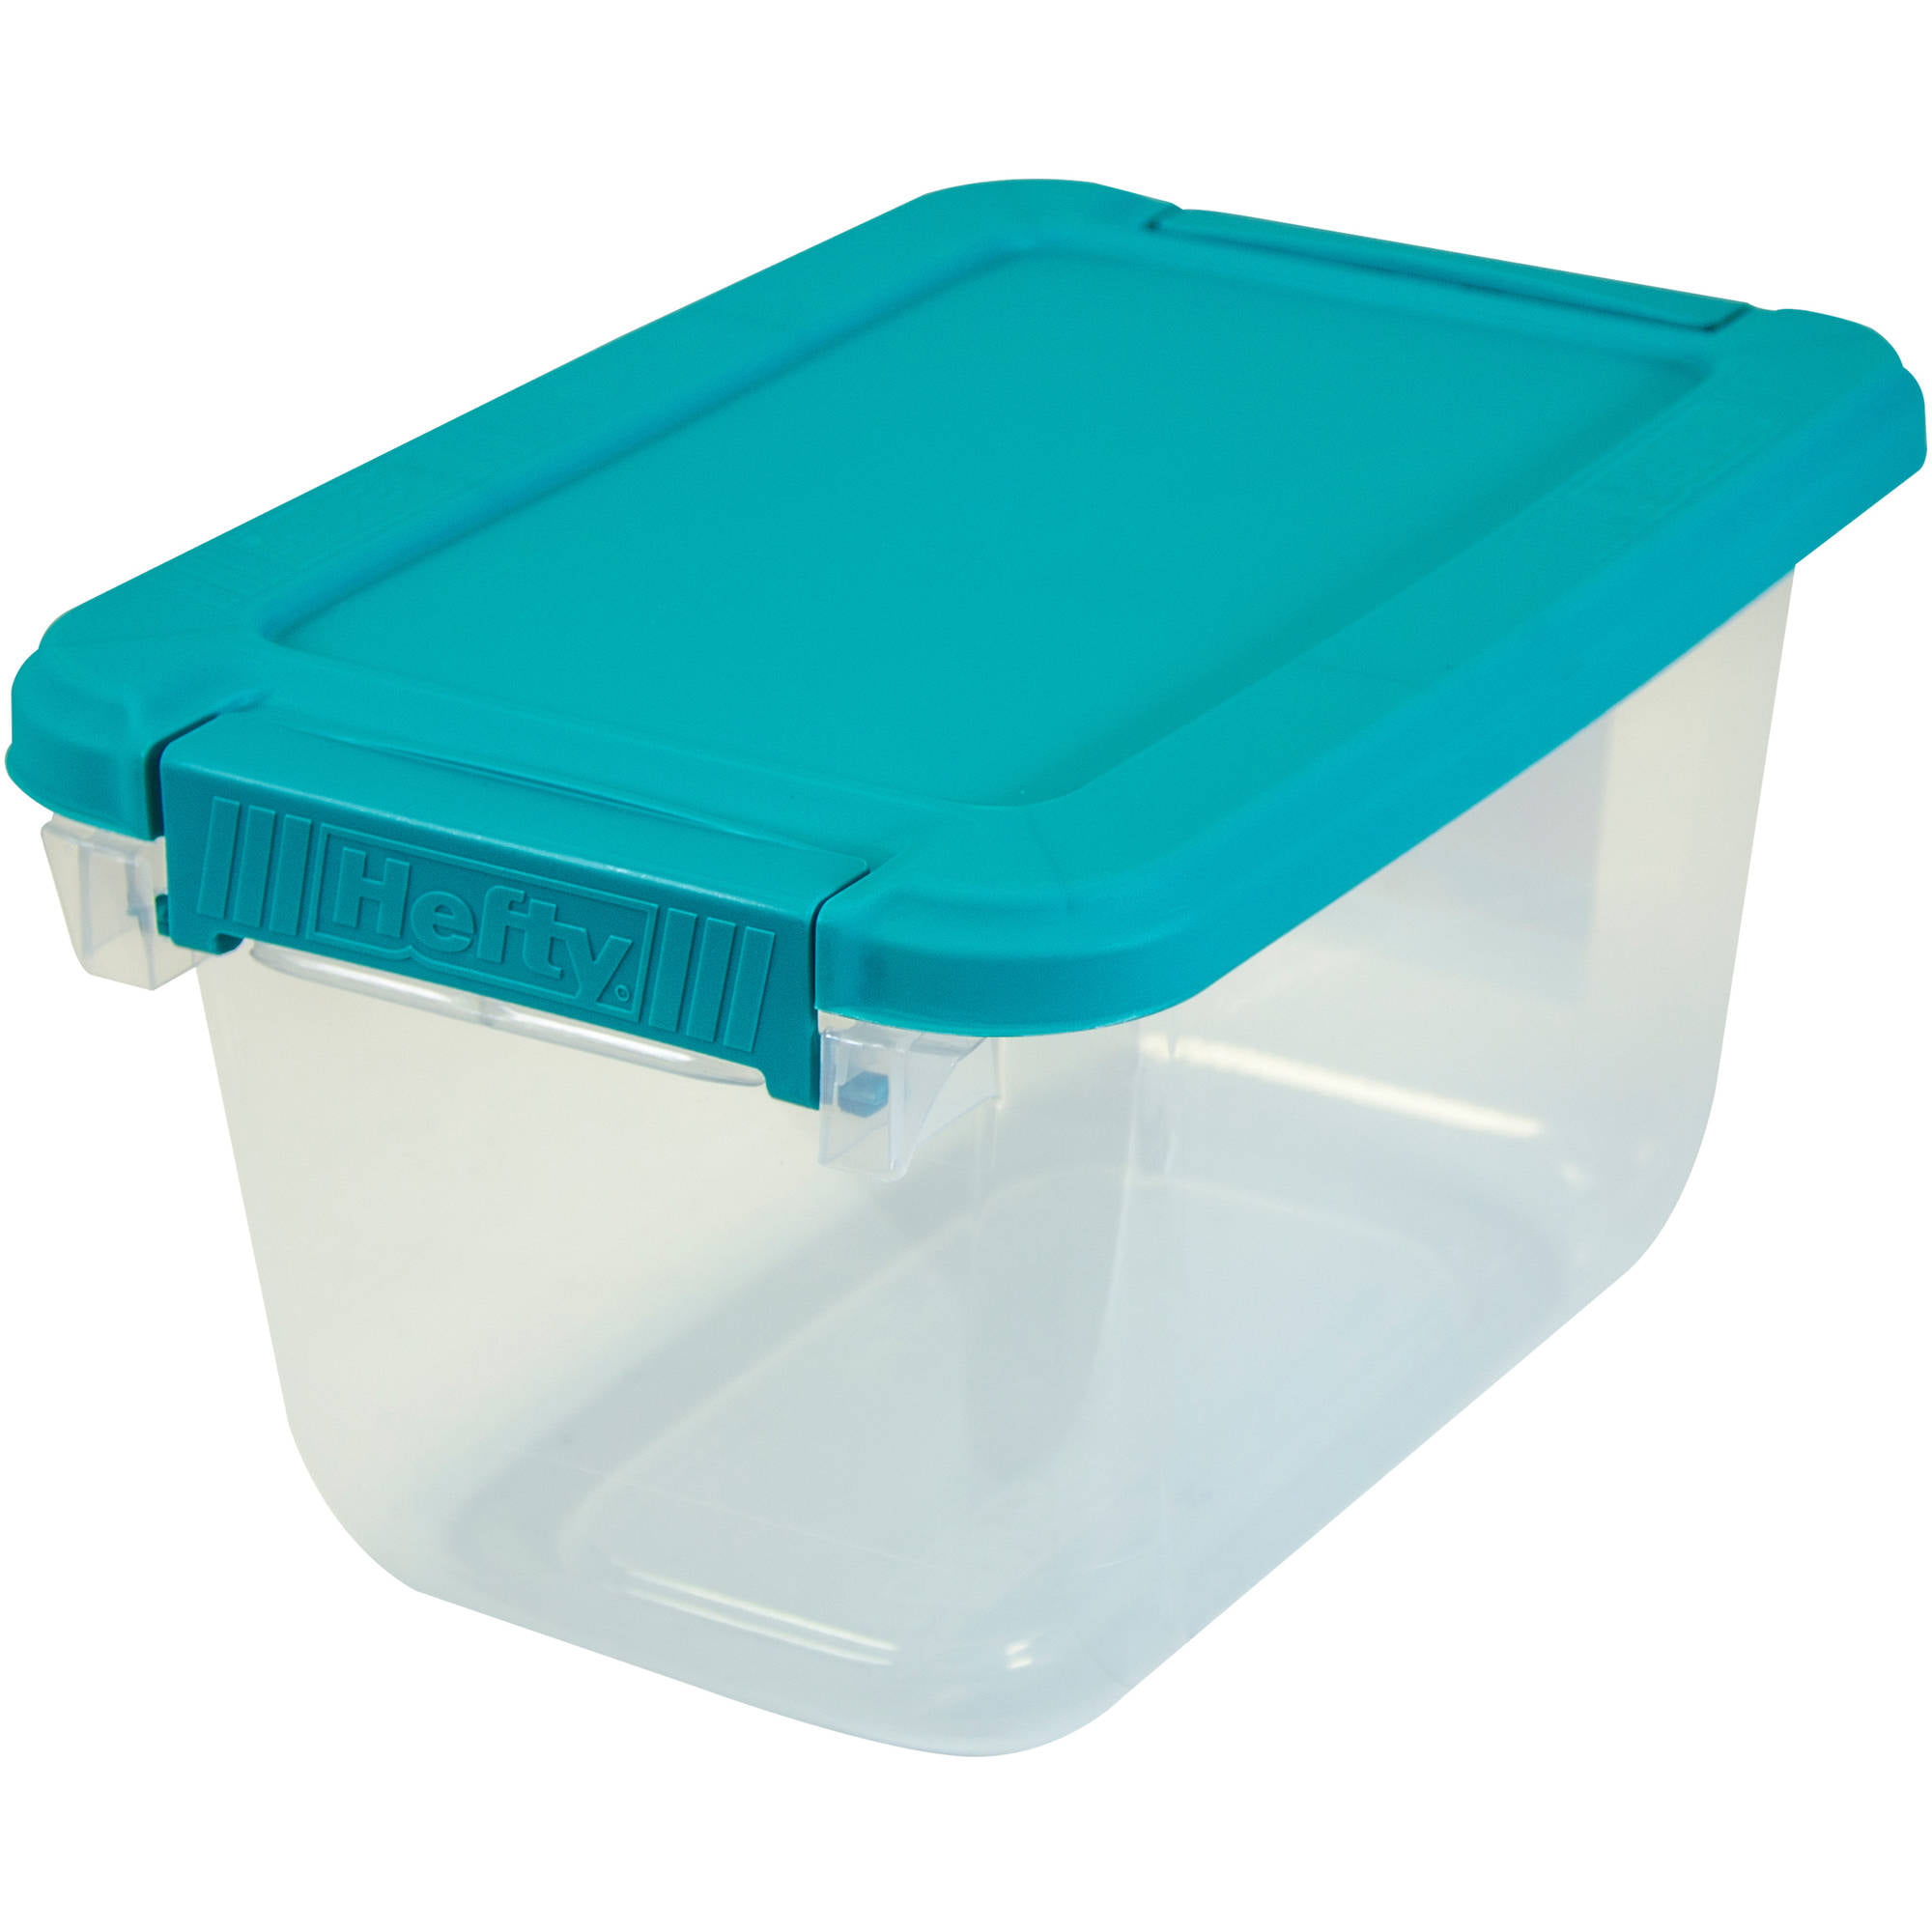  Hefty Clear Plastic Bin with Smoke Blue Lid (8 Pack) - 6.5 qt  Storage Container with Lid, Ideal Space Saver for Closet Shoe Storage Bins  and Under Shelf Storage : Home & Kitchen